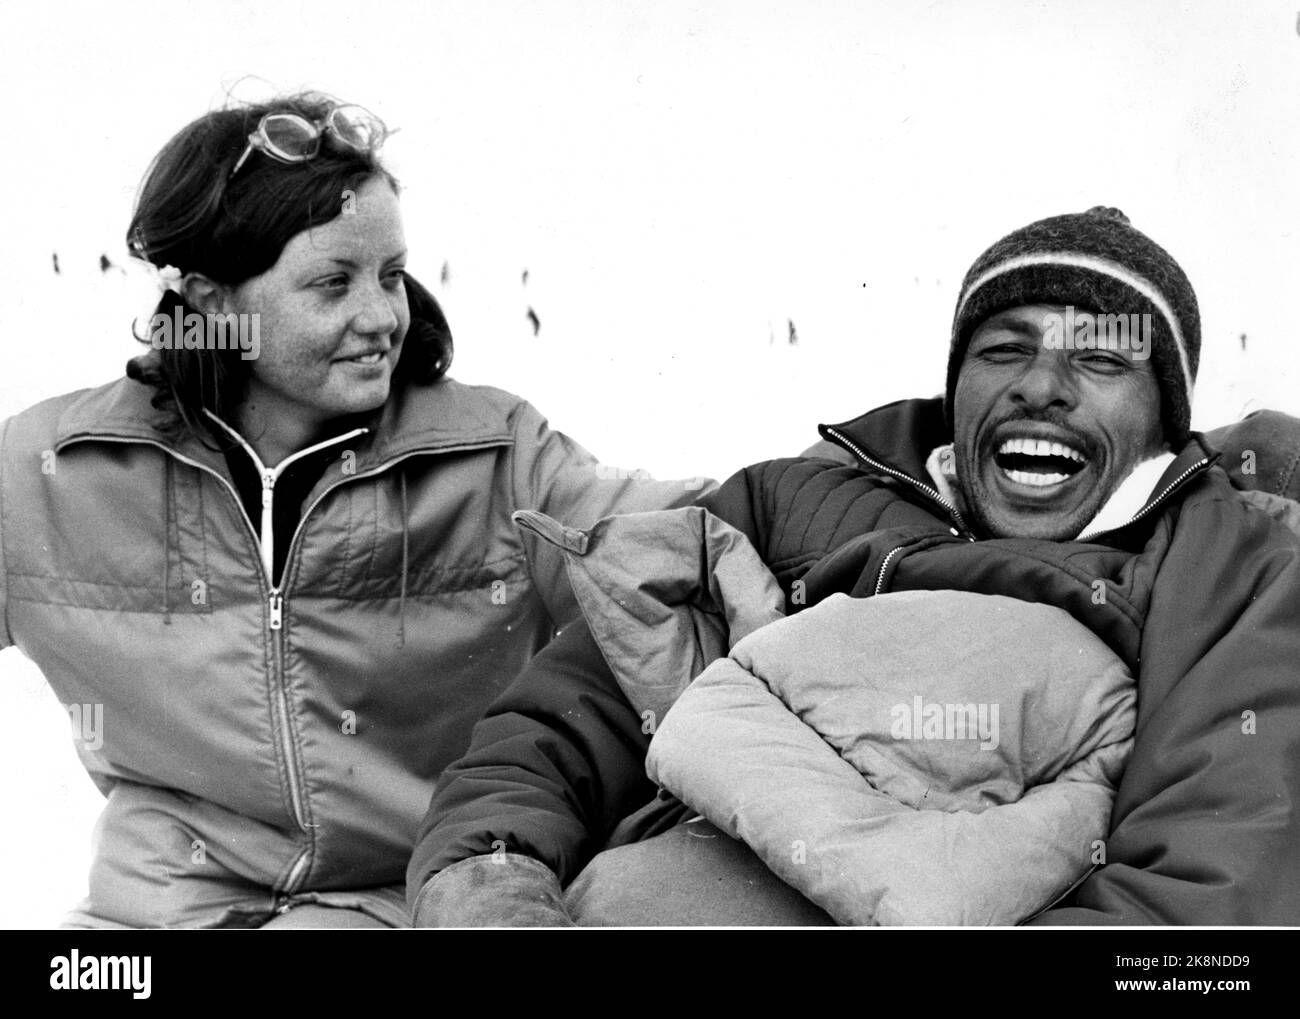 Beitostølen 1971 Abebe Bikila from Ethiopia, twice Olympic champion in the marathon, visits Beitostølen after an invitation from Erling Stordahl. He became paralyzed after a car accident three years ago. Here he is with the interpreter, Gunilla Forsmark. Photo: Ivar Aaserud / Current / NTB Stock Photo